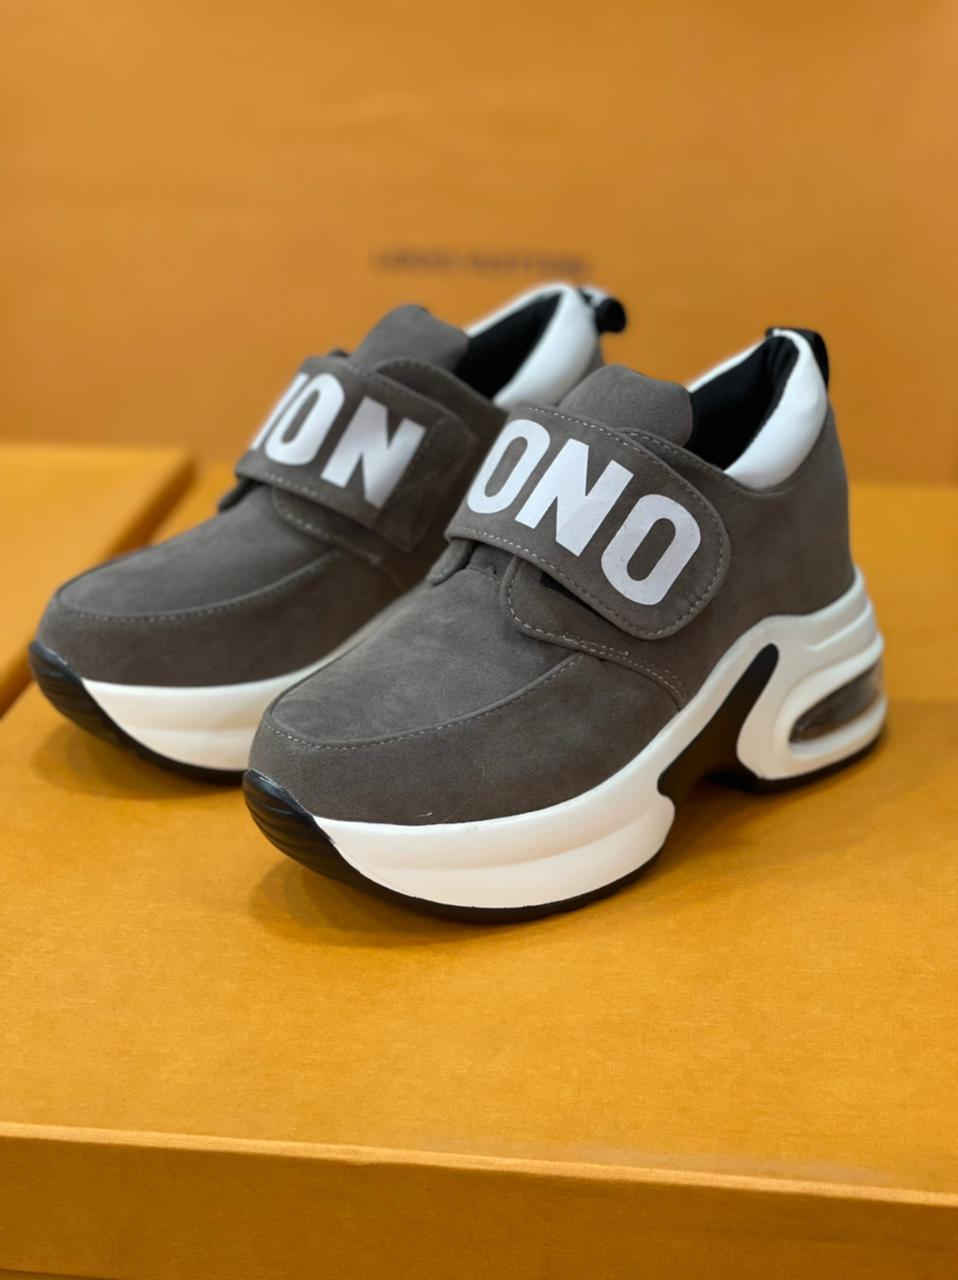 Best Price ONON Gray Highshoes